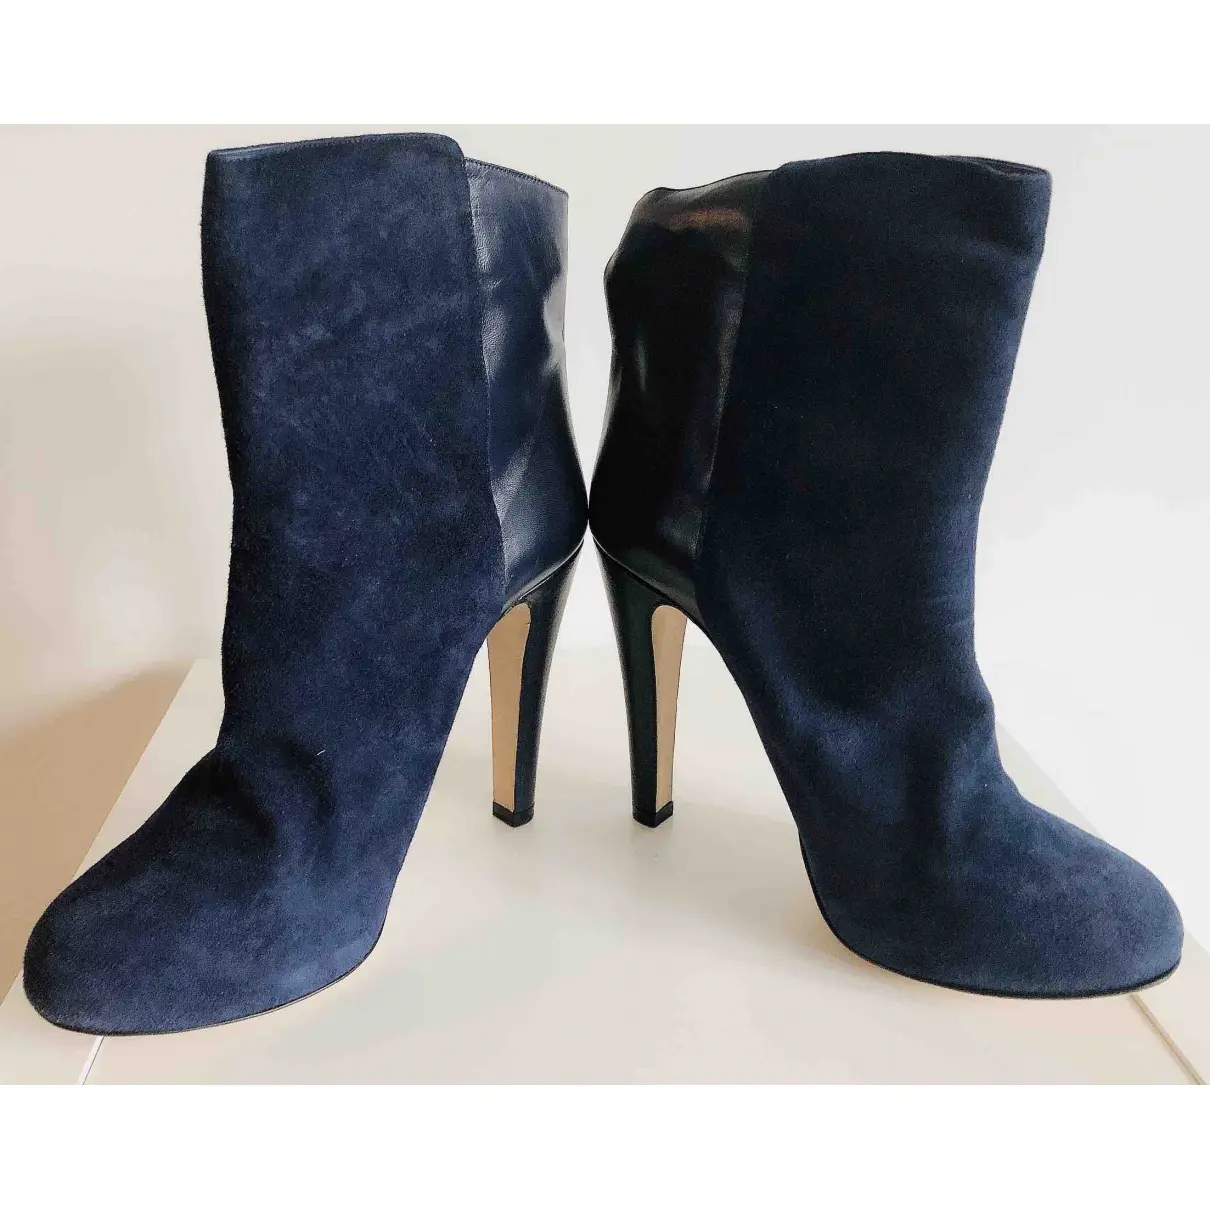 Buy Malone Souliers Boots online